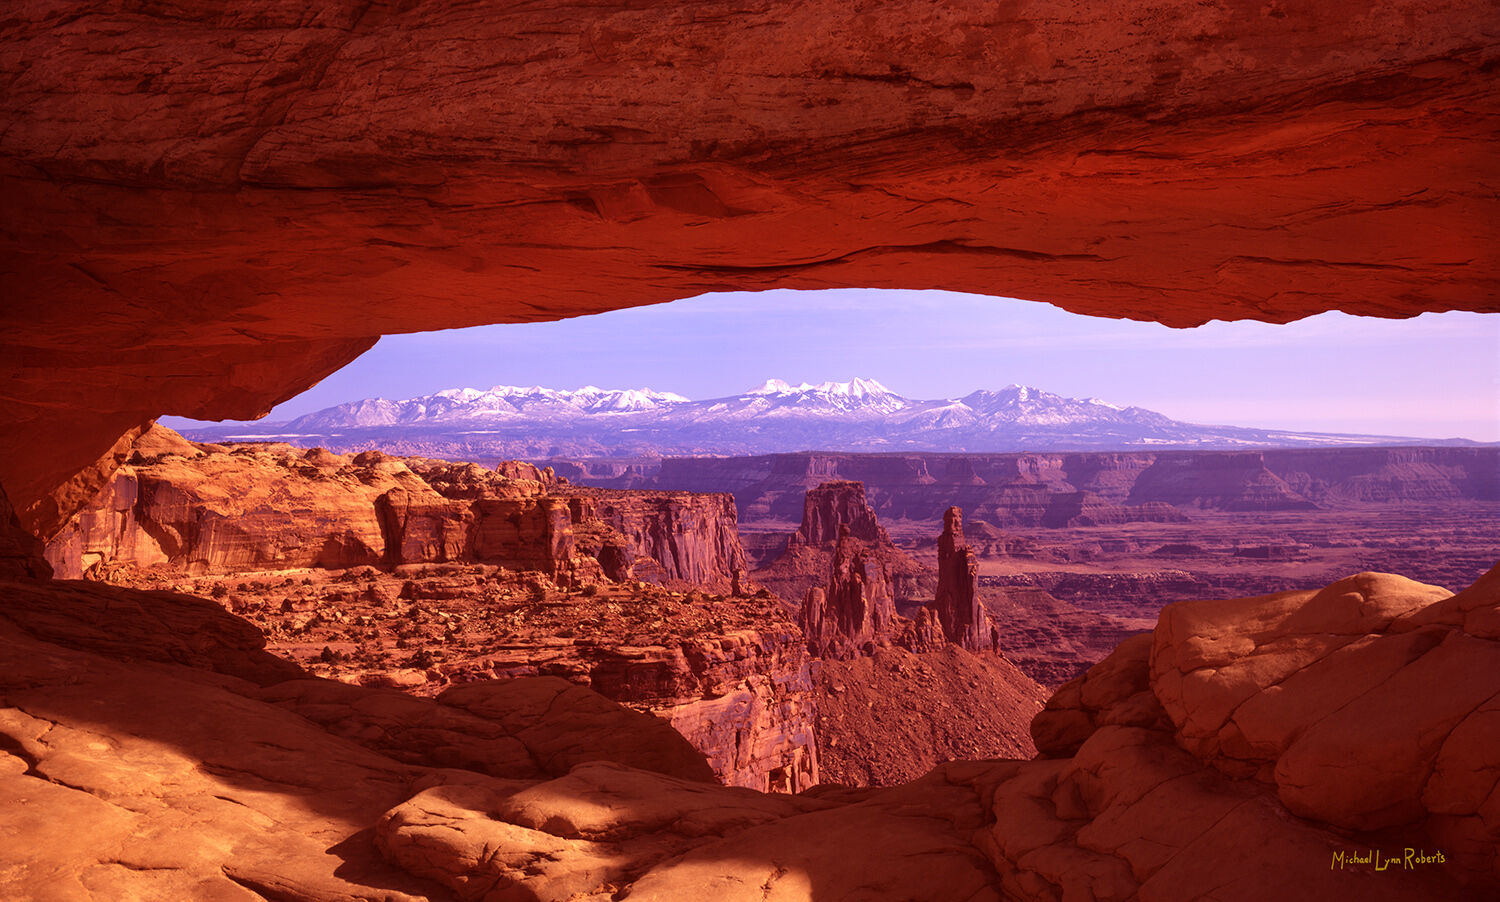 Back in 2007, I photographed Mesa Arch in Canyonlands National Park at sunrise. That was a wonderful experience, and I've been...